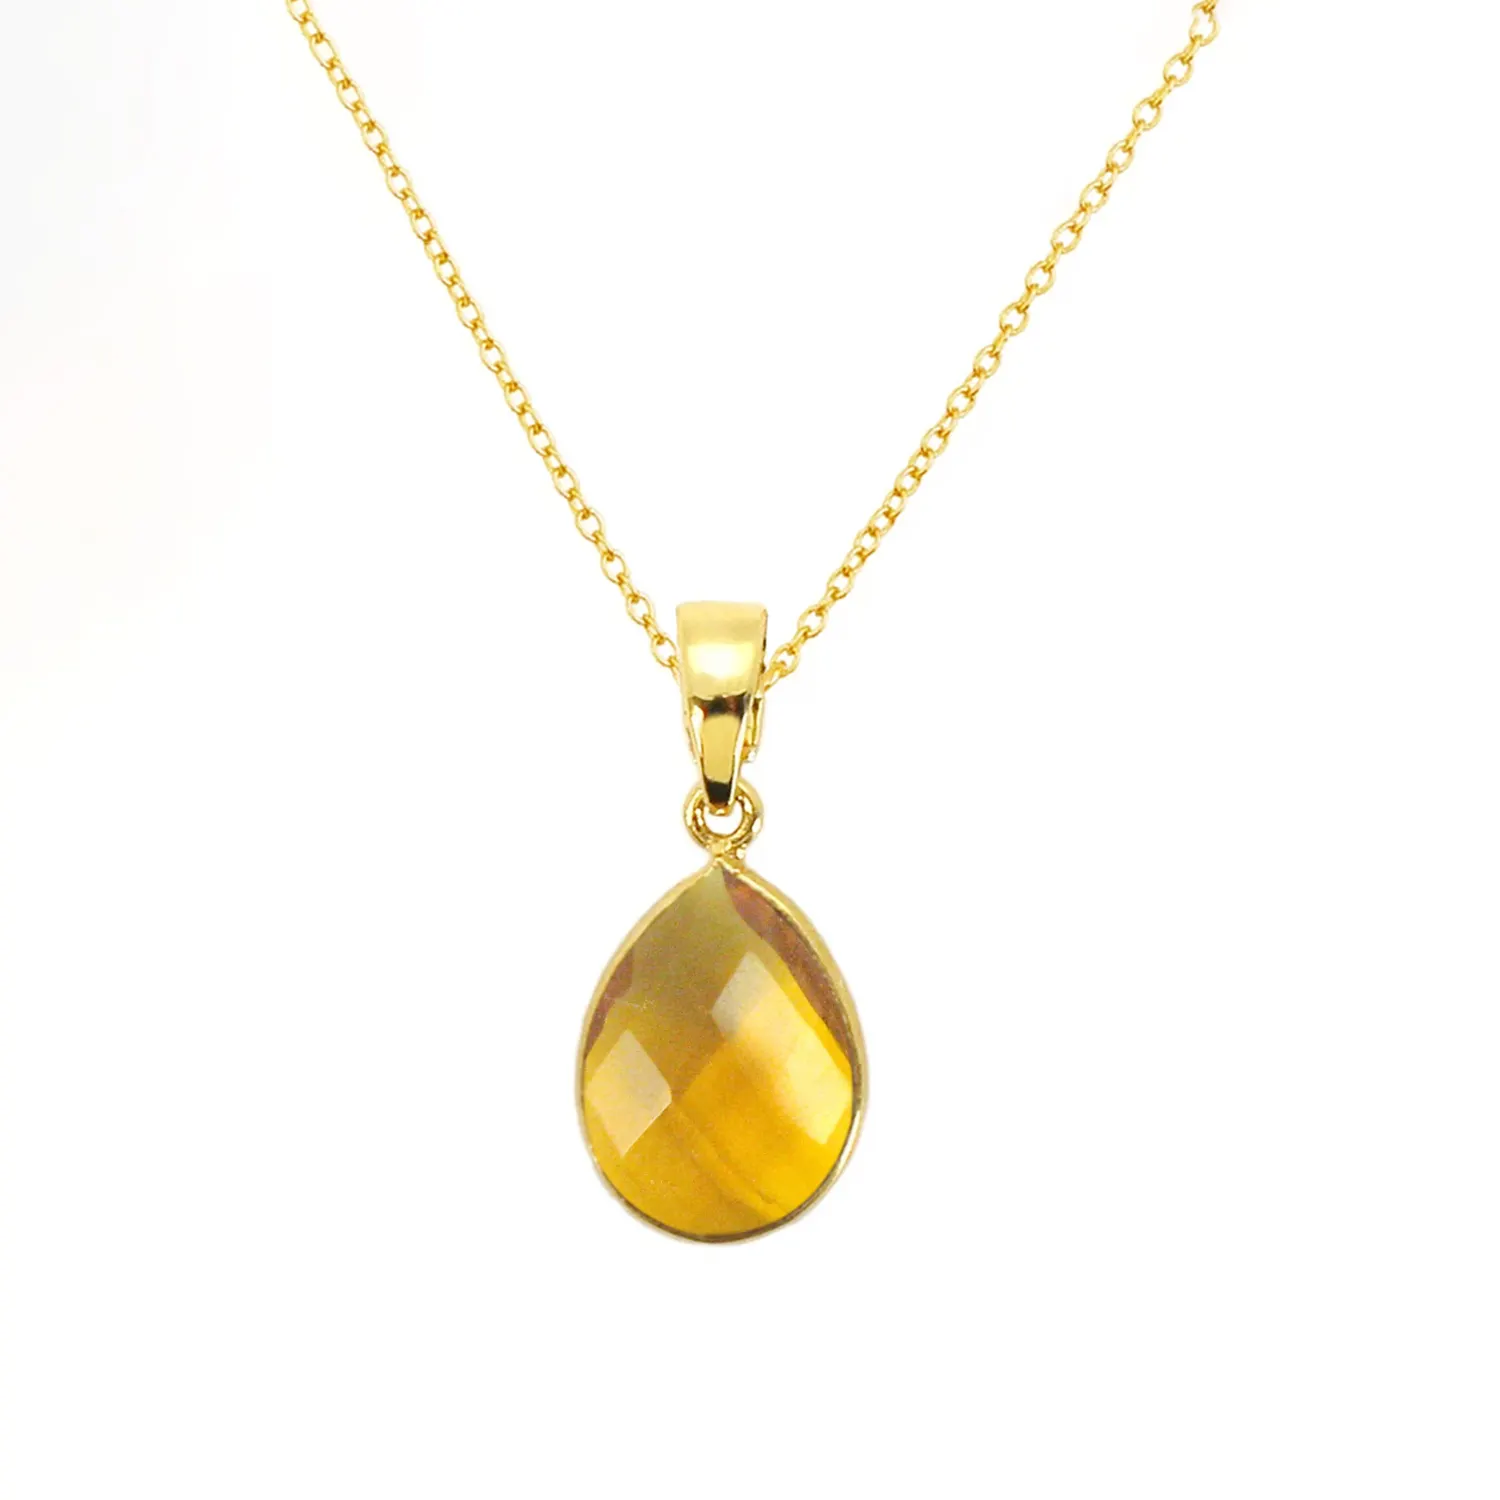 925 Sterling Silver Faceted Pear Cut Citrine Gemstone Gold Vermeil Bezel Setting Pendant Cable Chain Necklace Wholesale